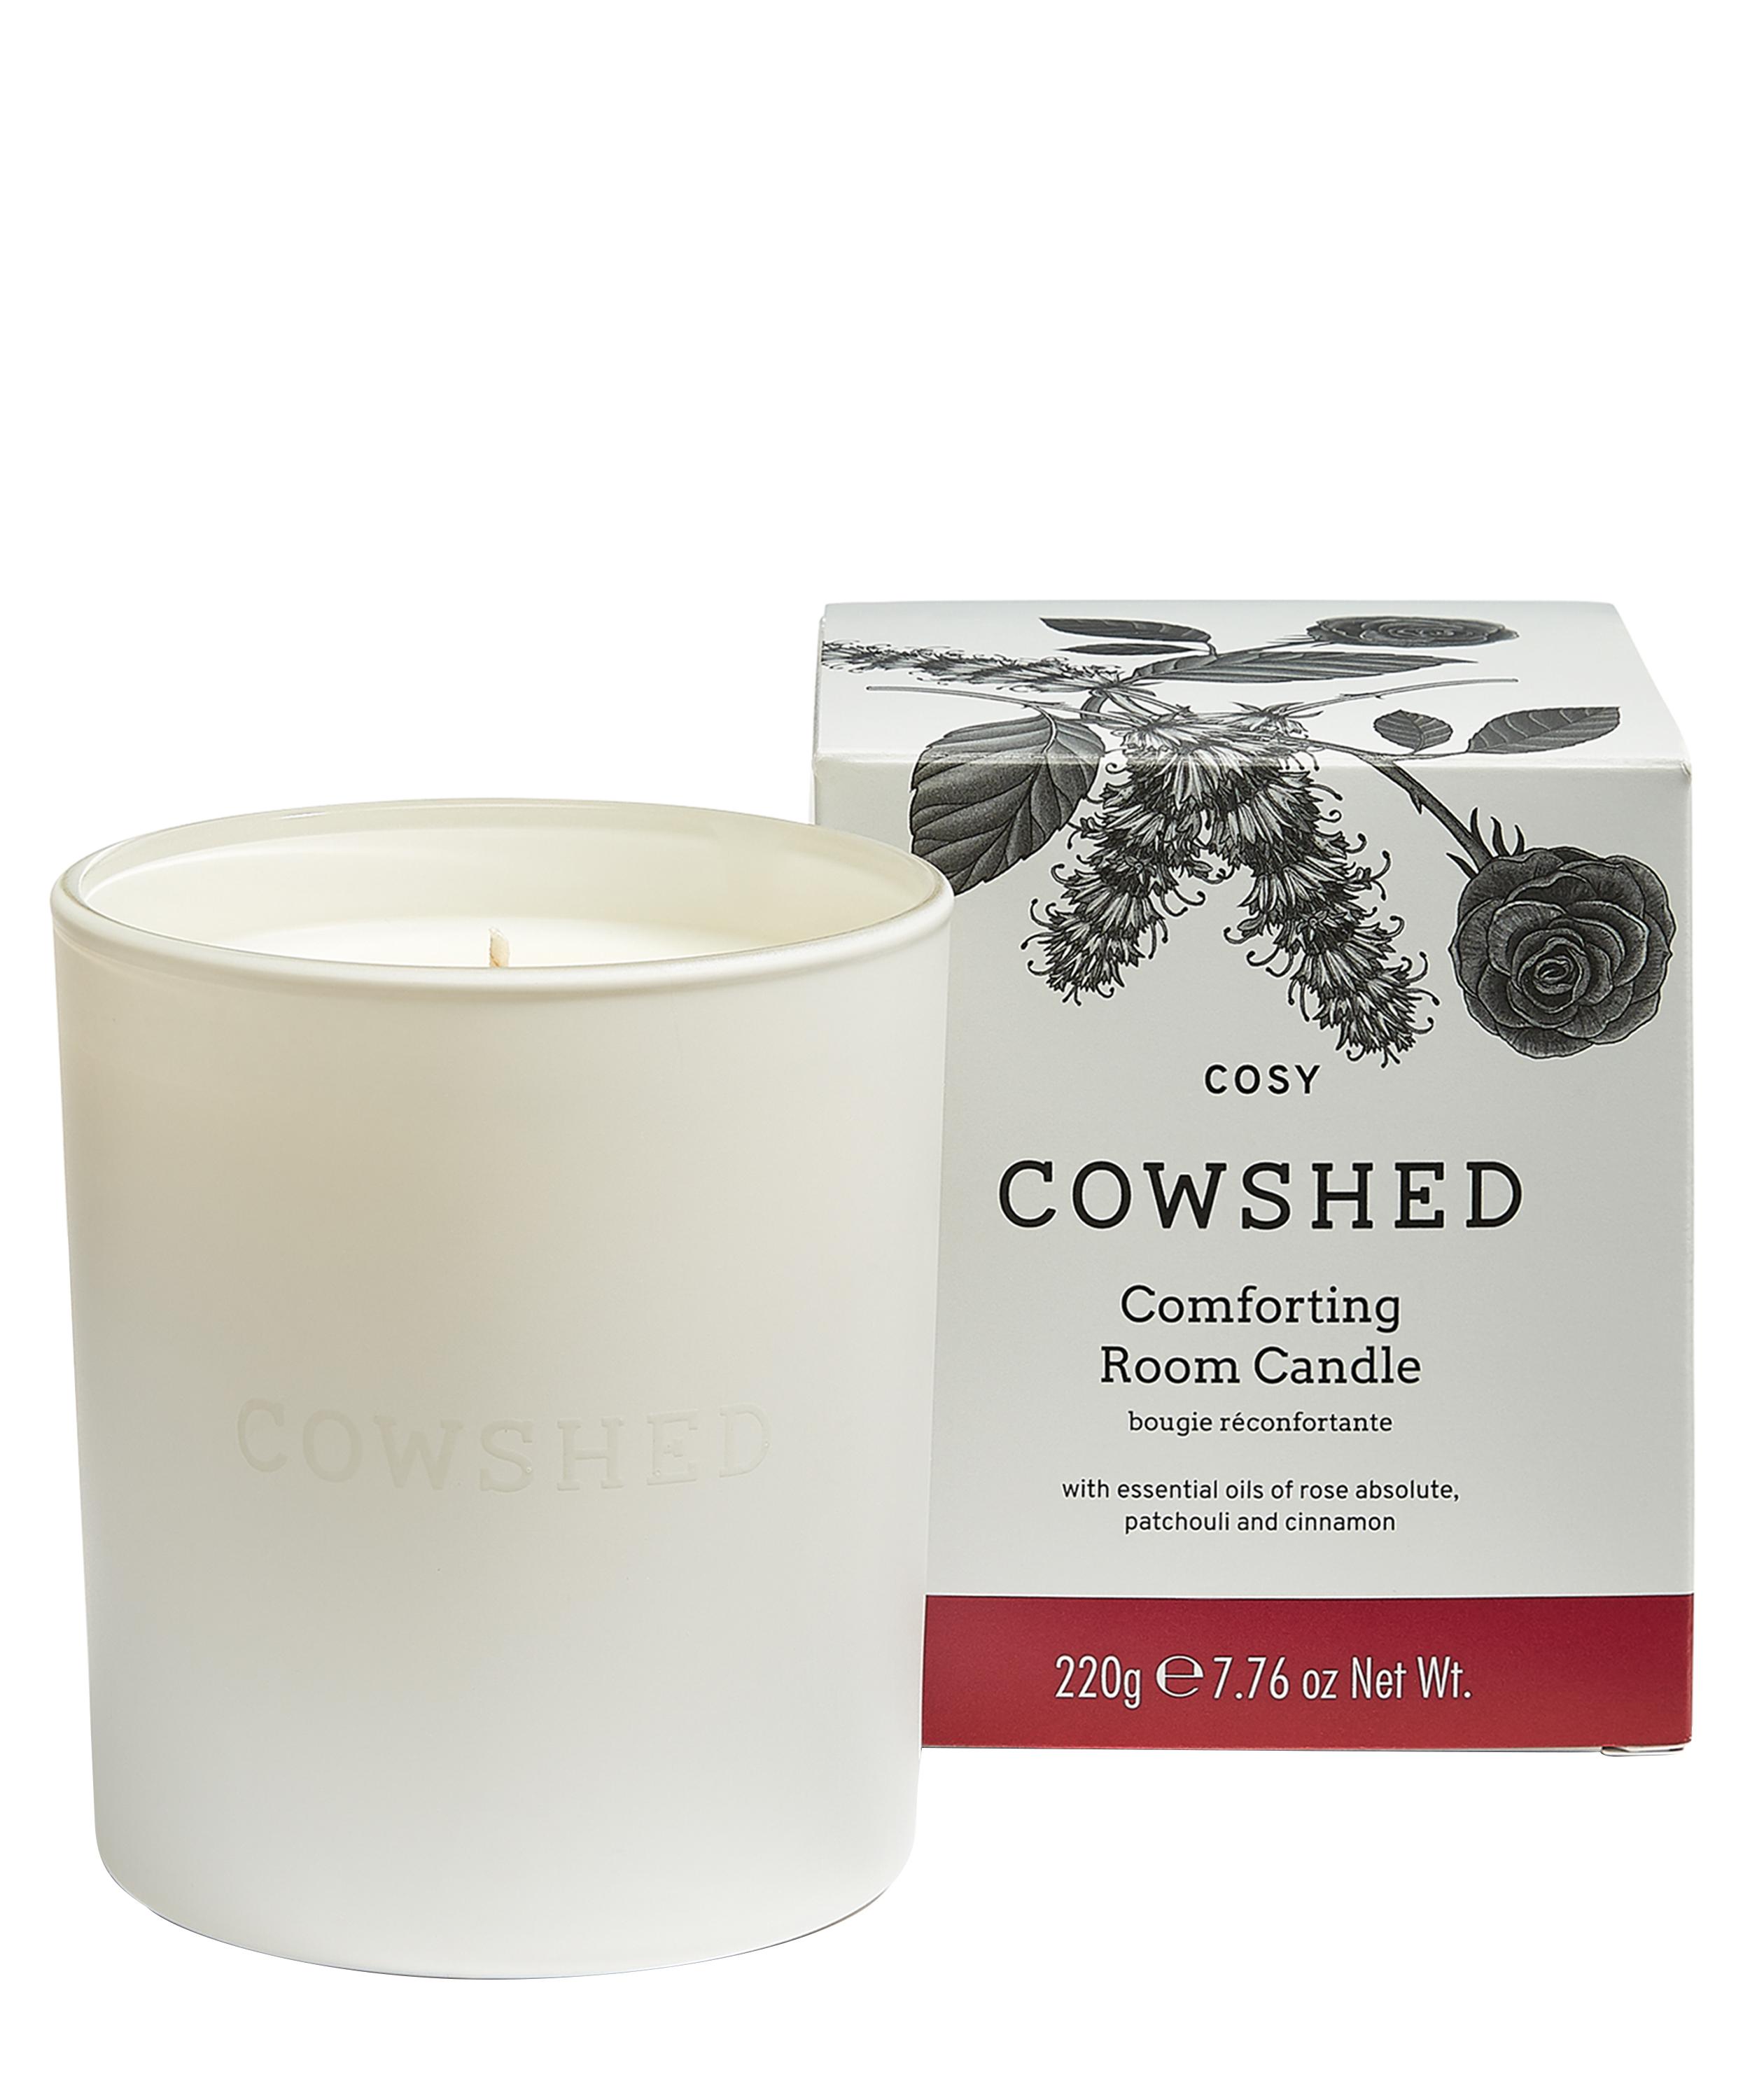 Cowshed COSY Comforting Room Candle 220g